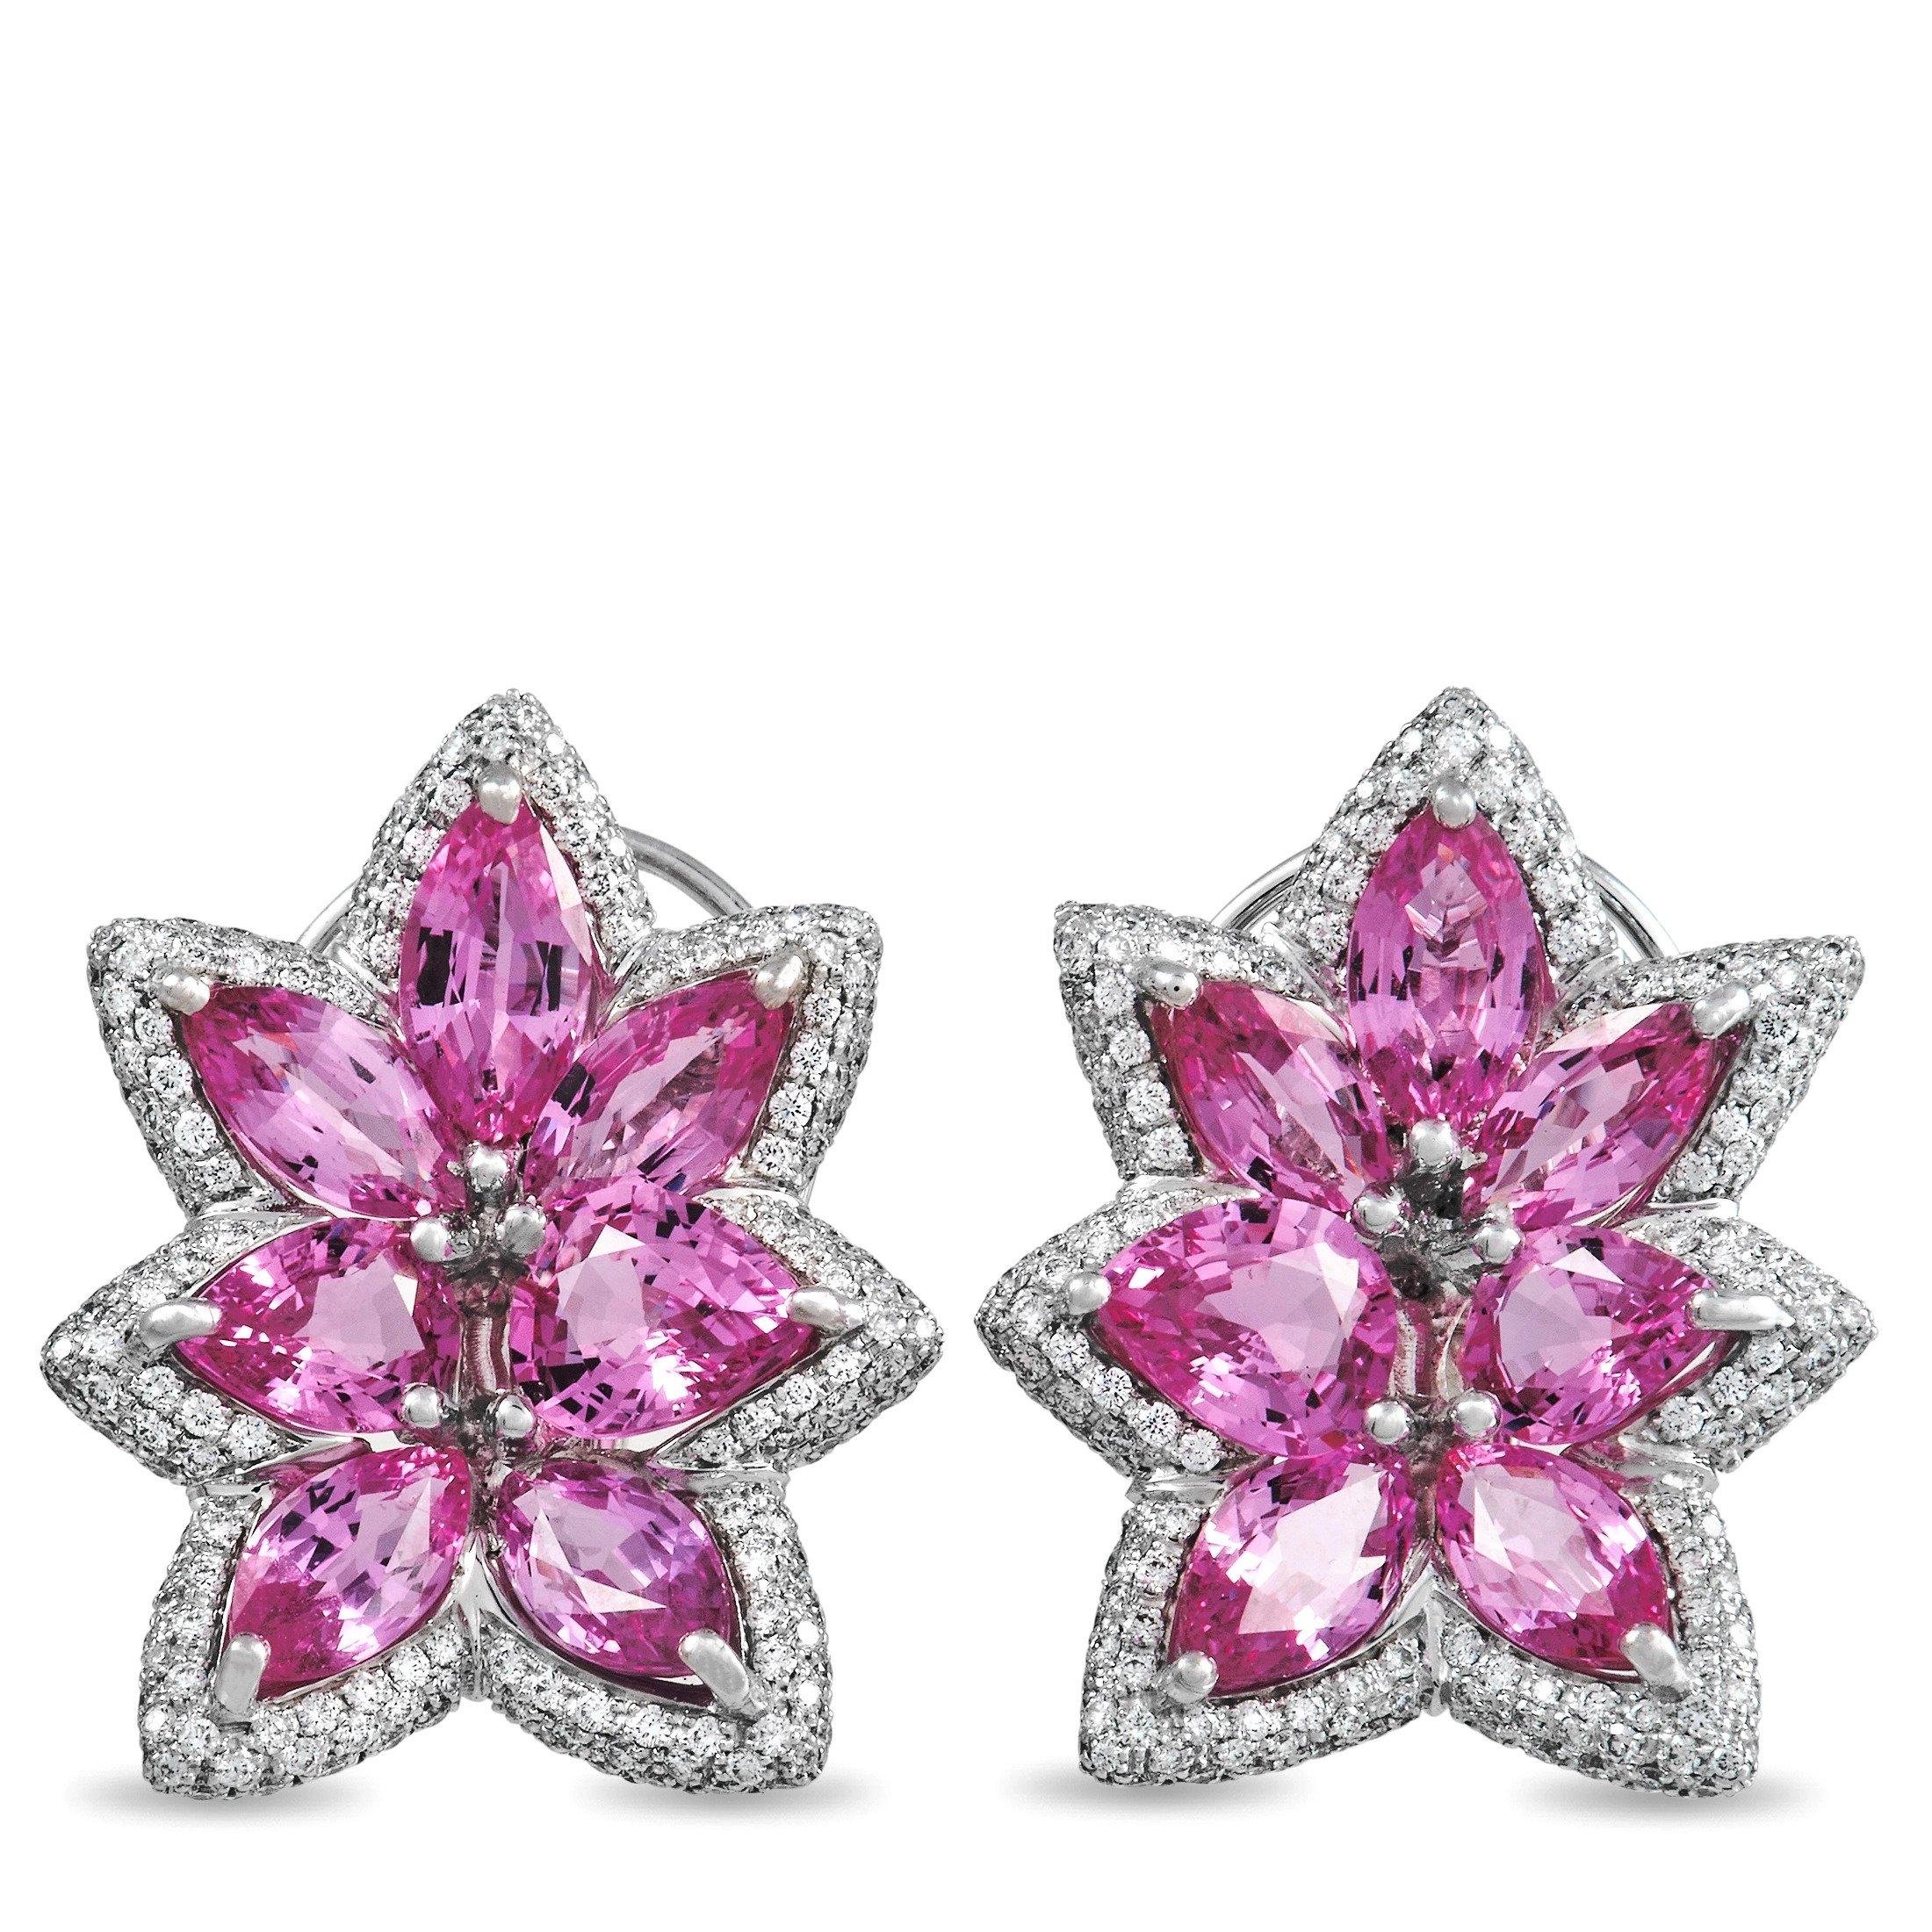 De Grisogono 18K White Gold 1.94 Ct Diamond and Pink Sapphire Earrings In New Condition For Sale In Southampton, PA